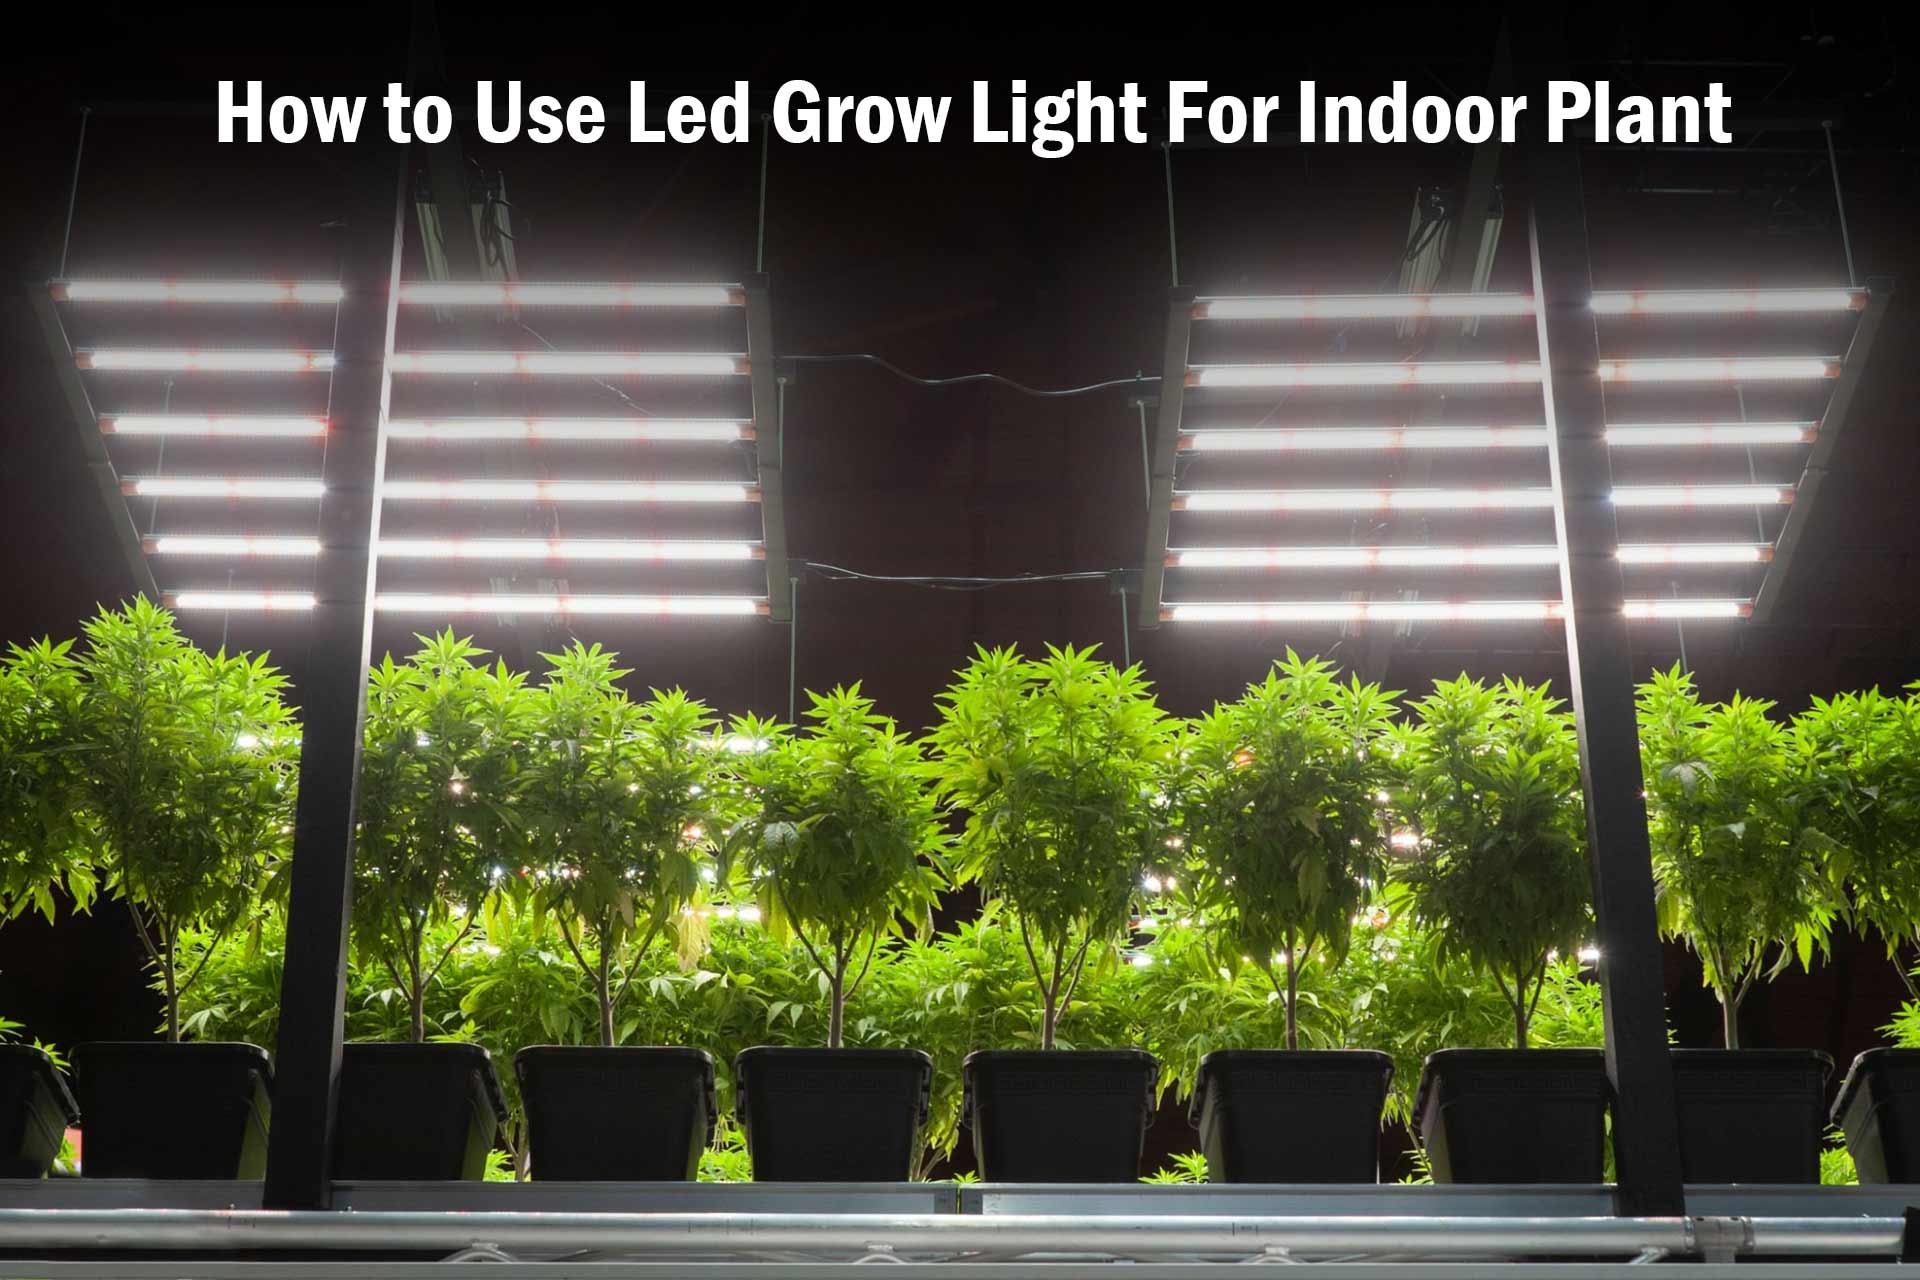 How to Use LED Grow Lights for Indoor Plants